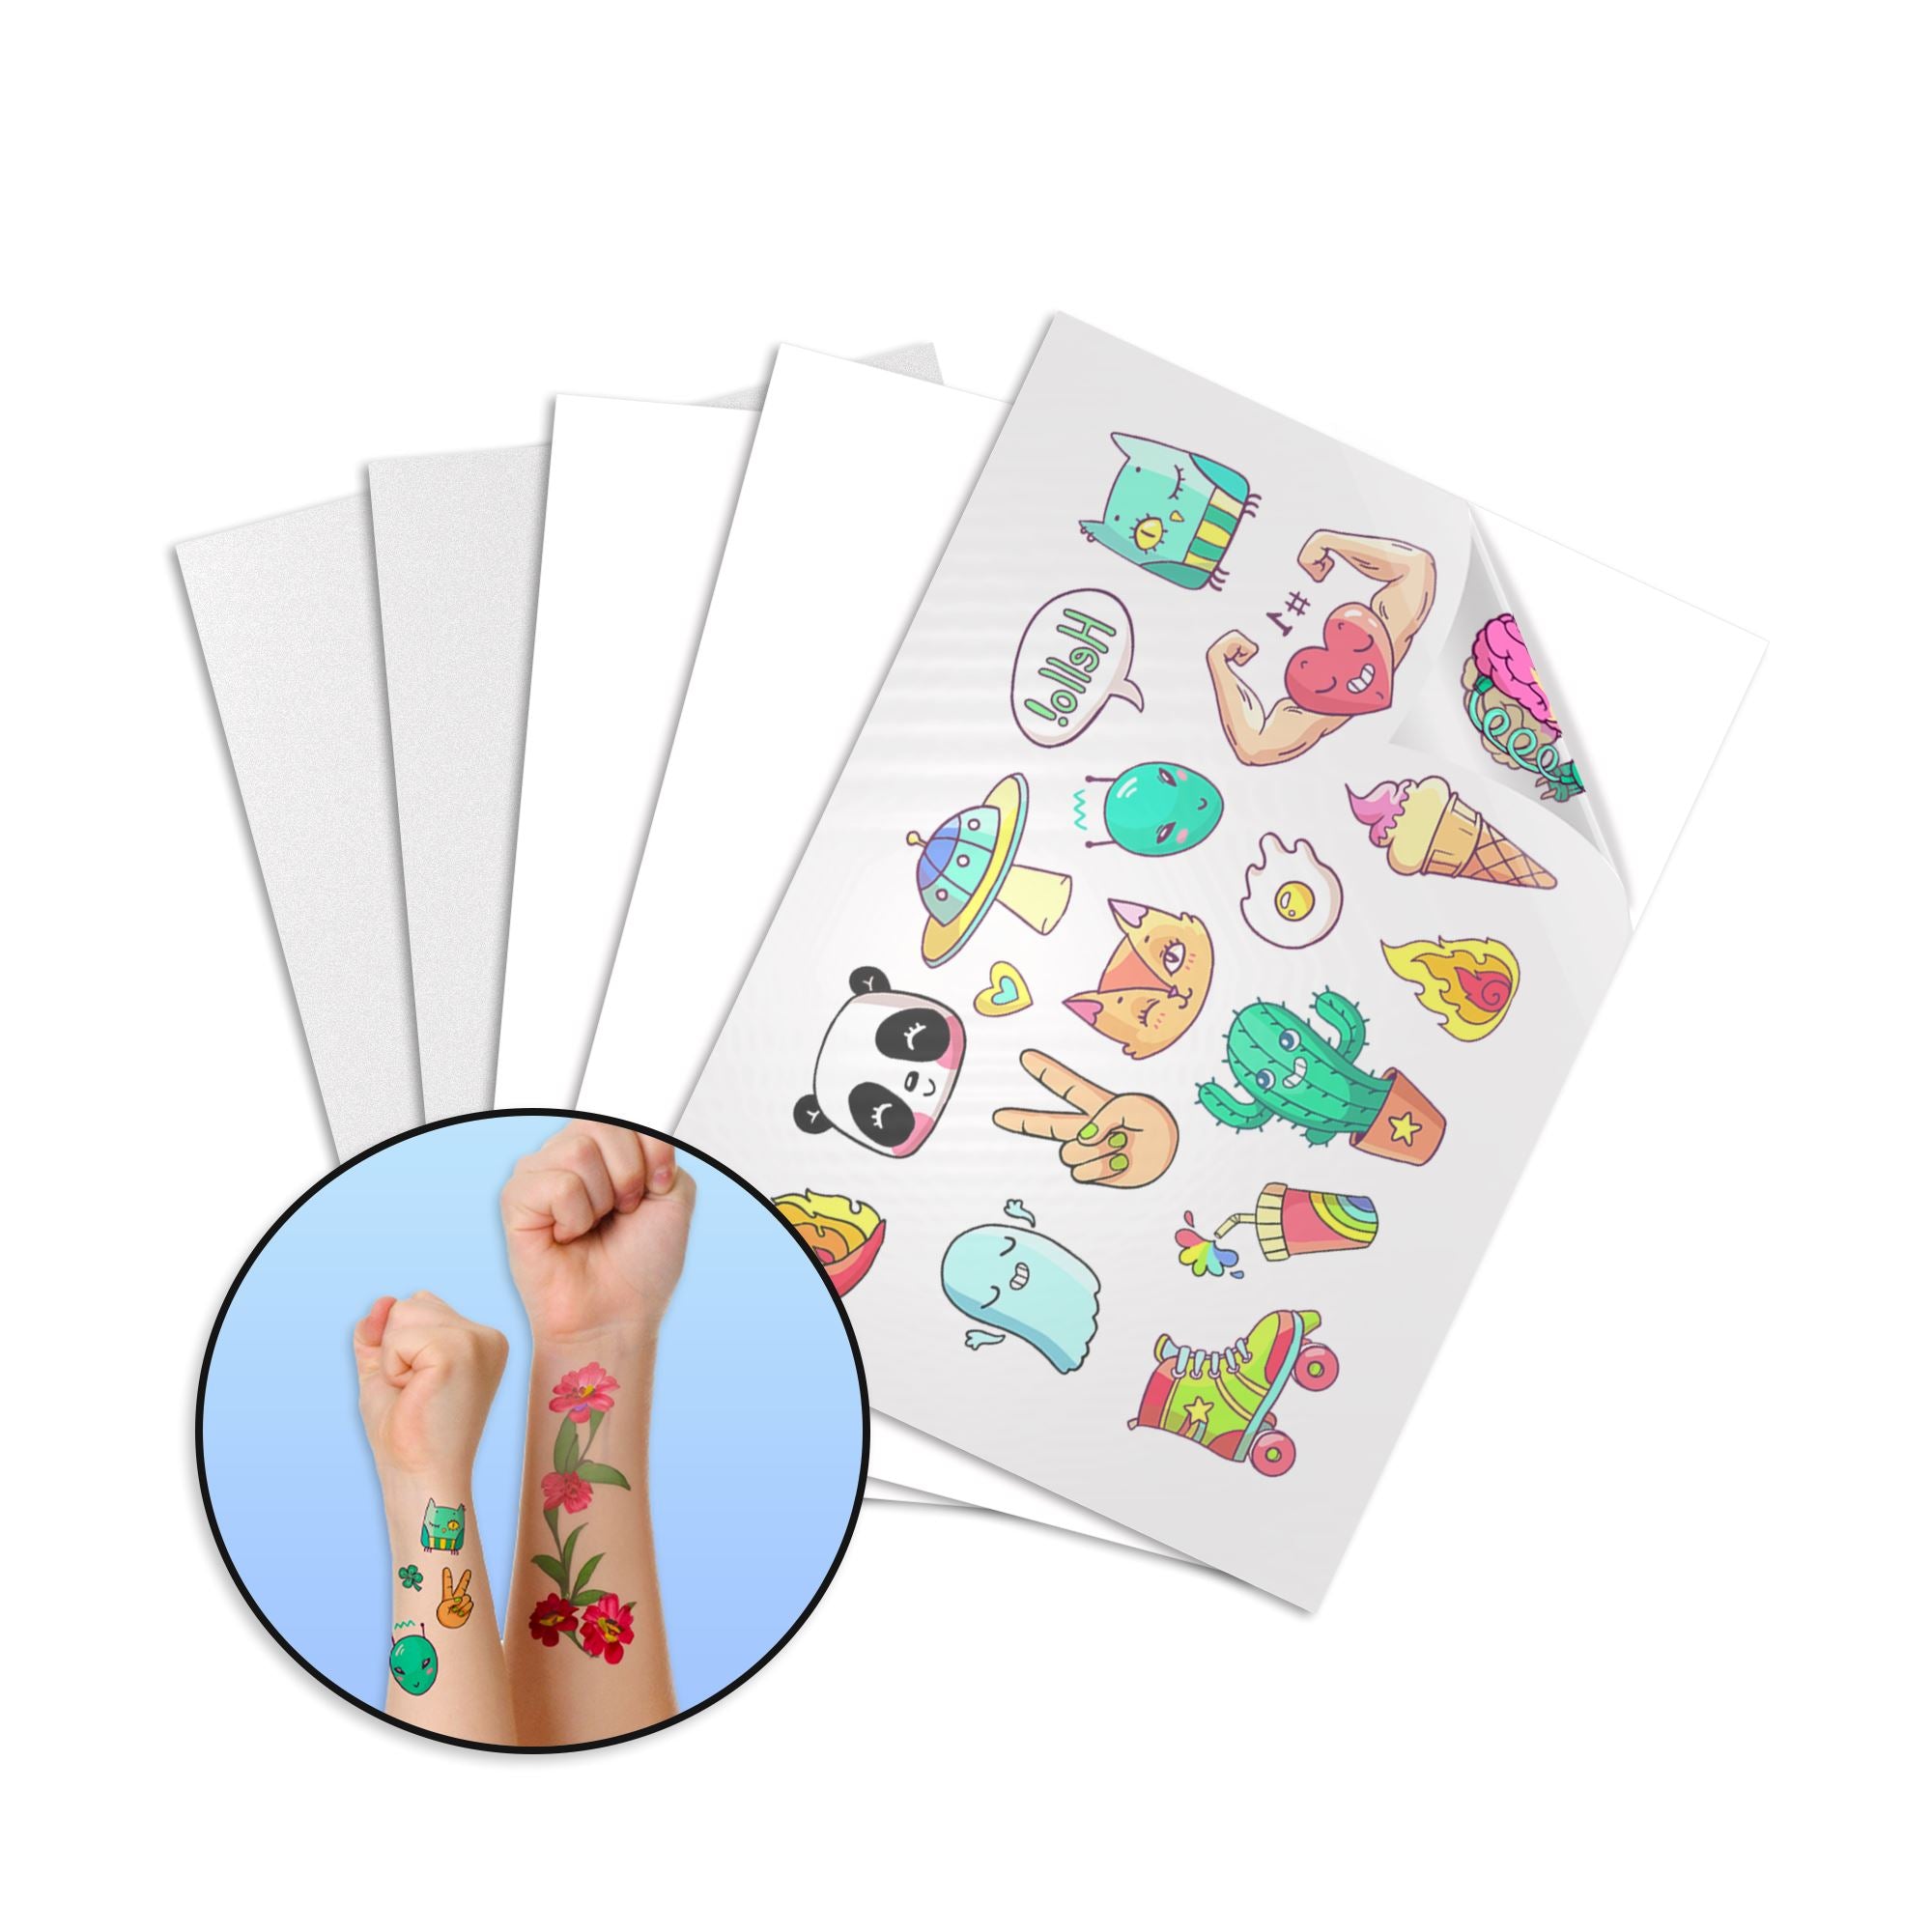 Uninet iColor Temporary Tattoo 2 Step Transfer and Adhesive Paper Kit - 8.27 x 11.69 - 100 Pack